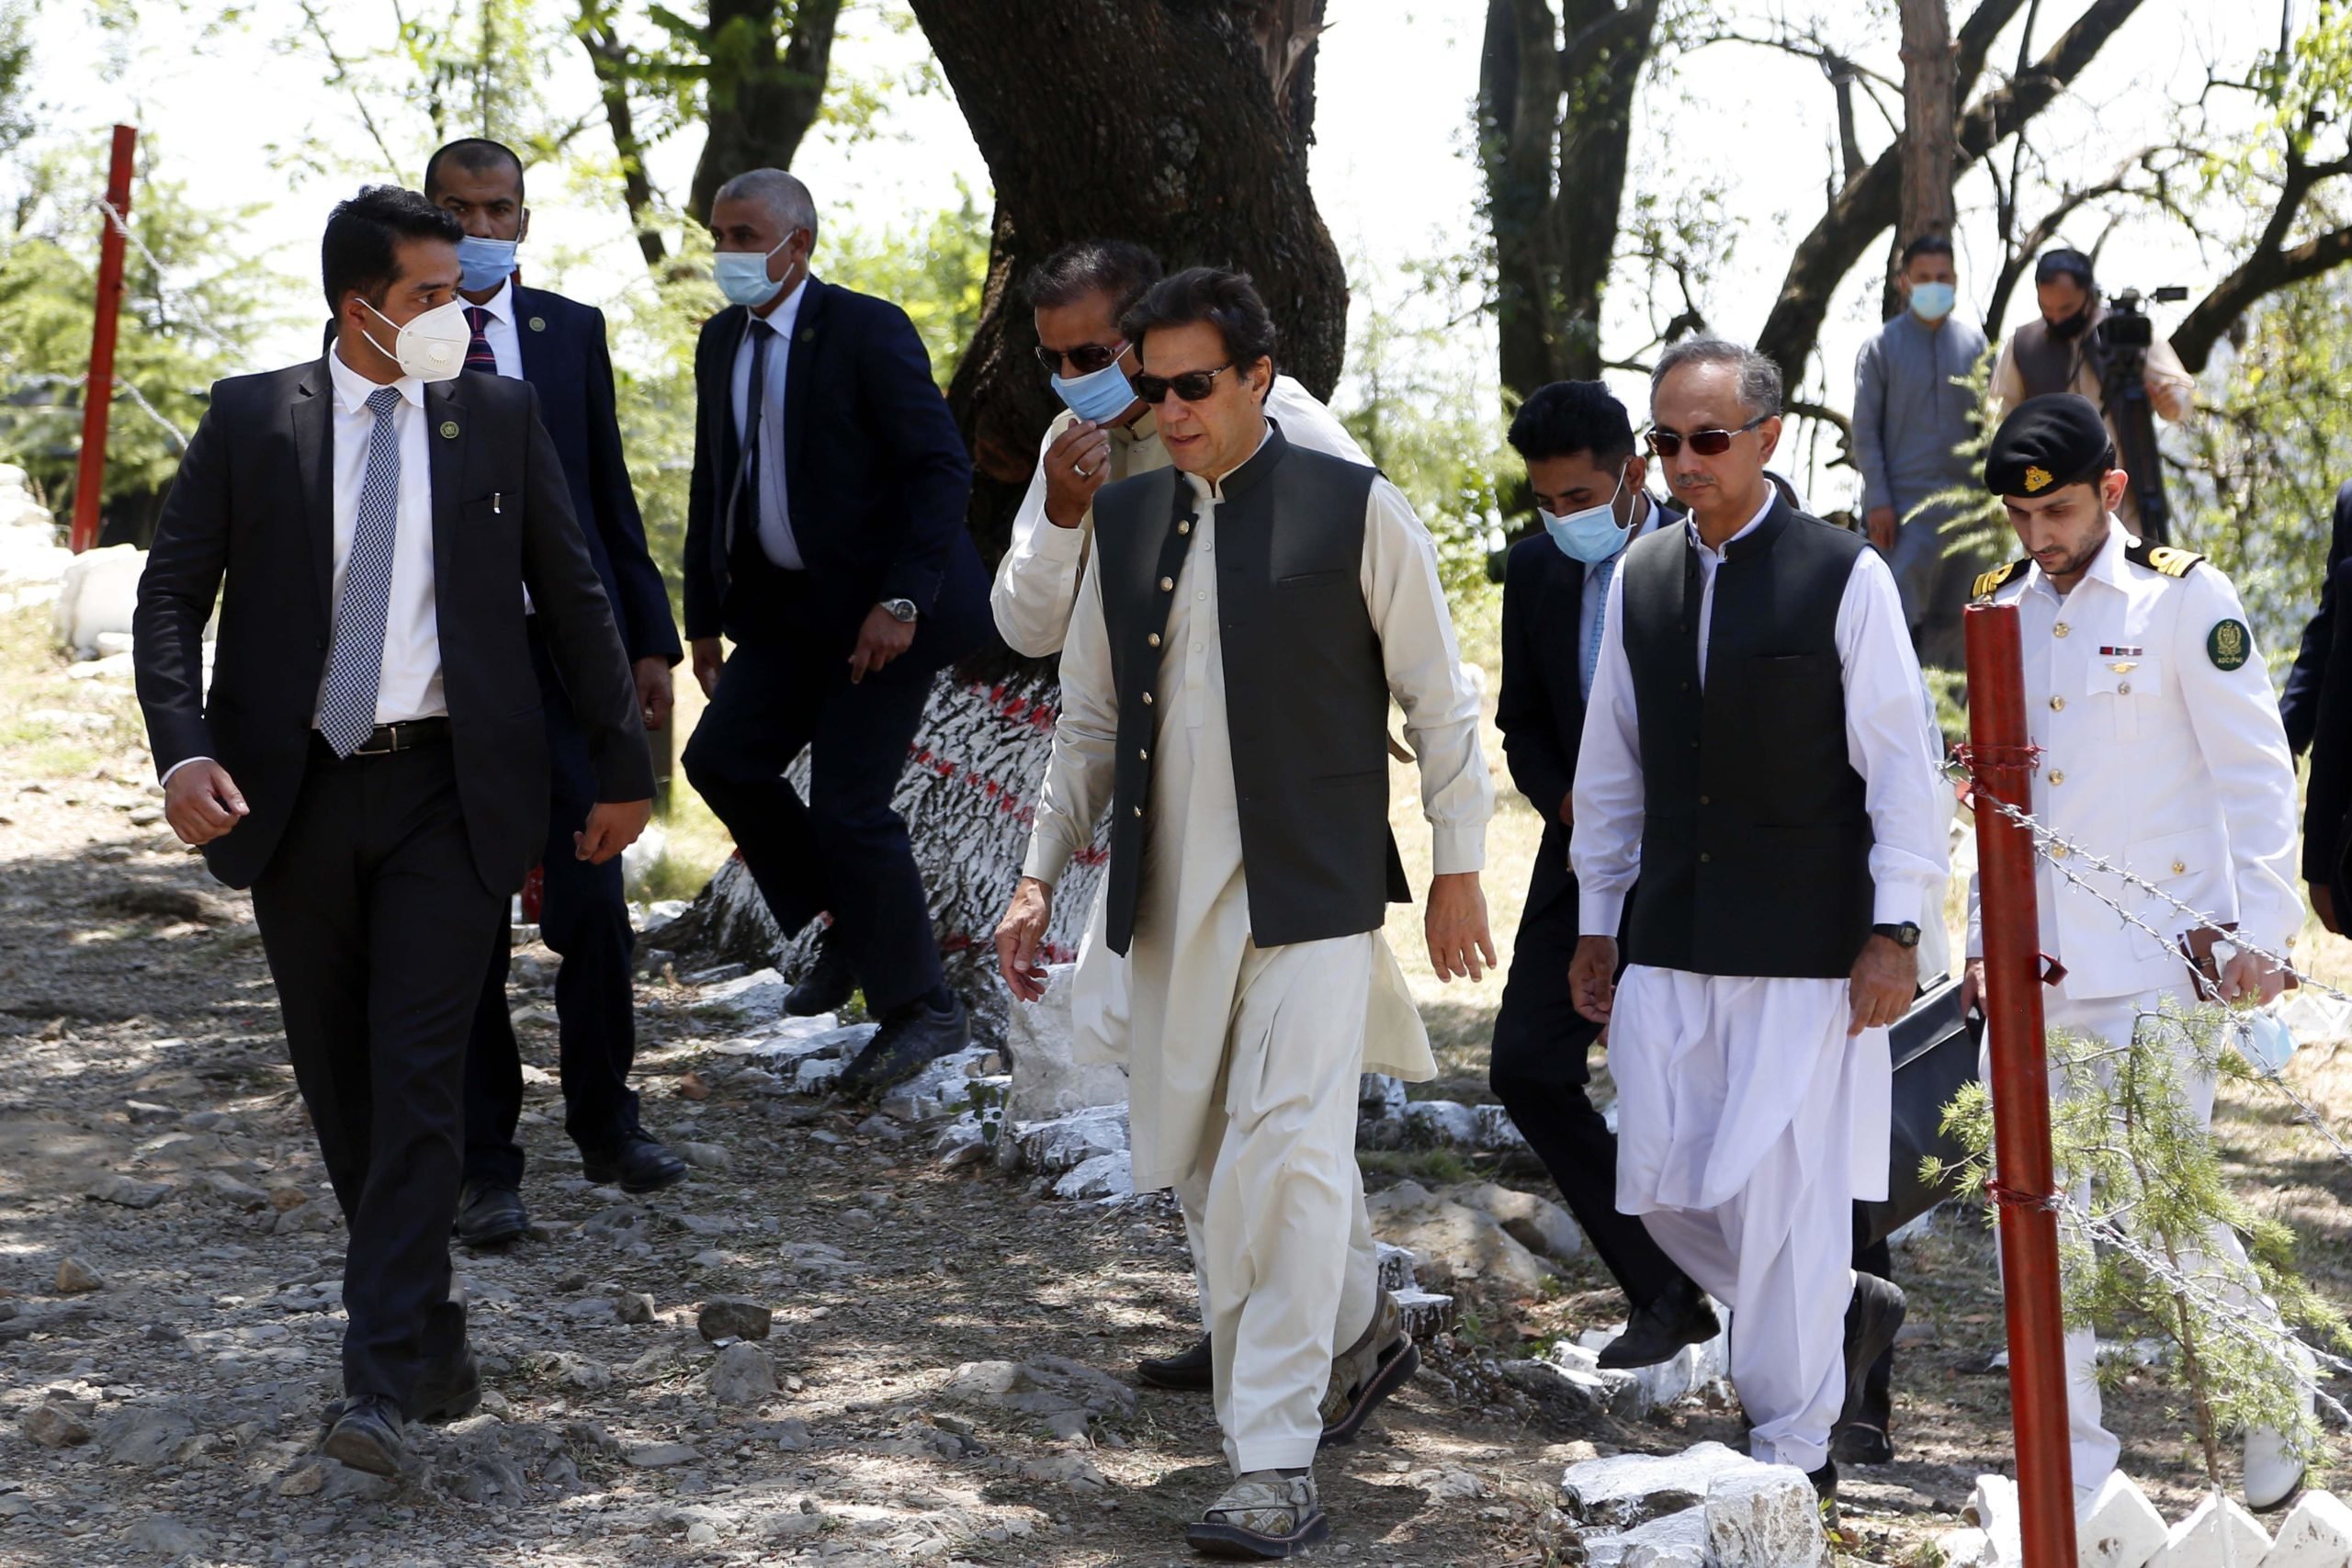 Pakistani Prime Minister Imran Khan (C) returns from where he planted a tree during an event in connection with the 10 Billion Tree Tsunami program in the country's northwest city of Haripur on May 27, 2021